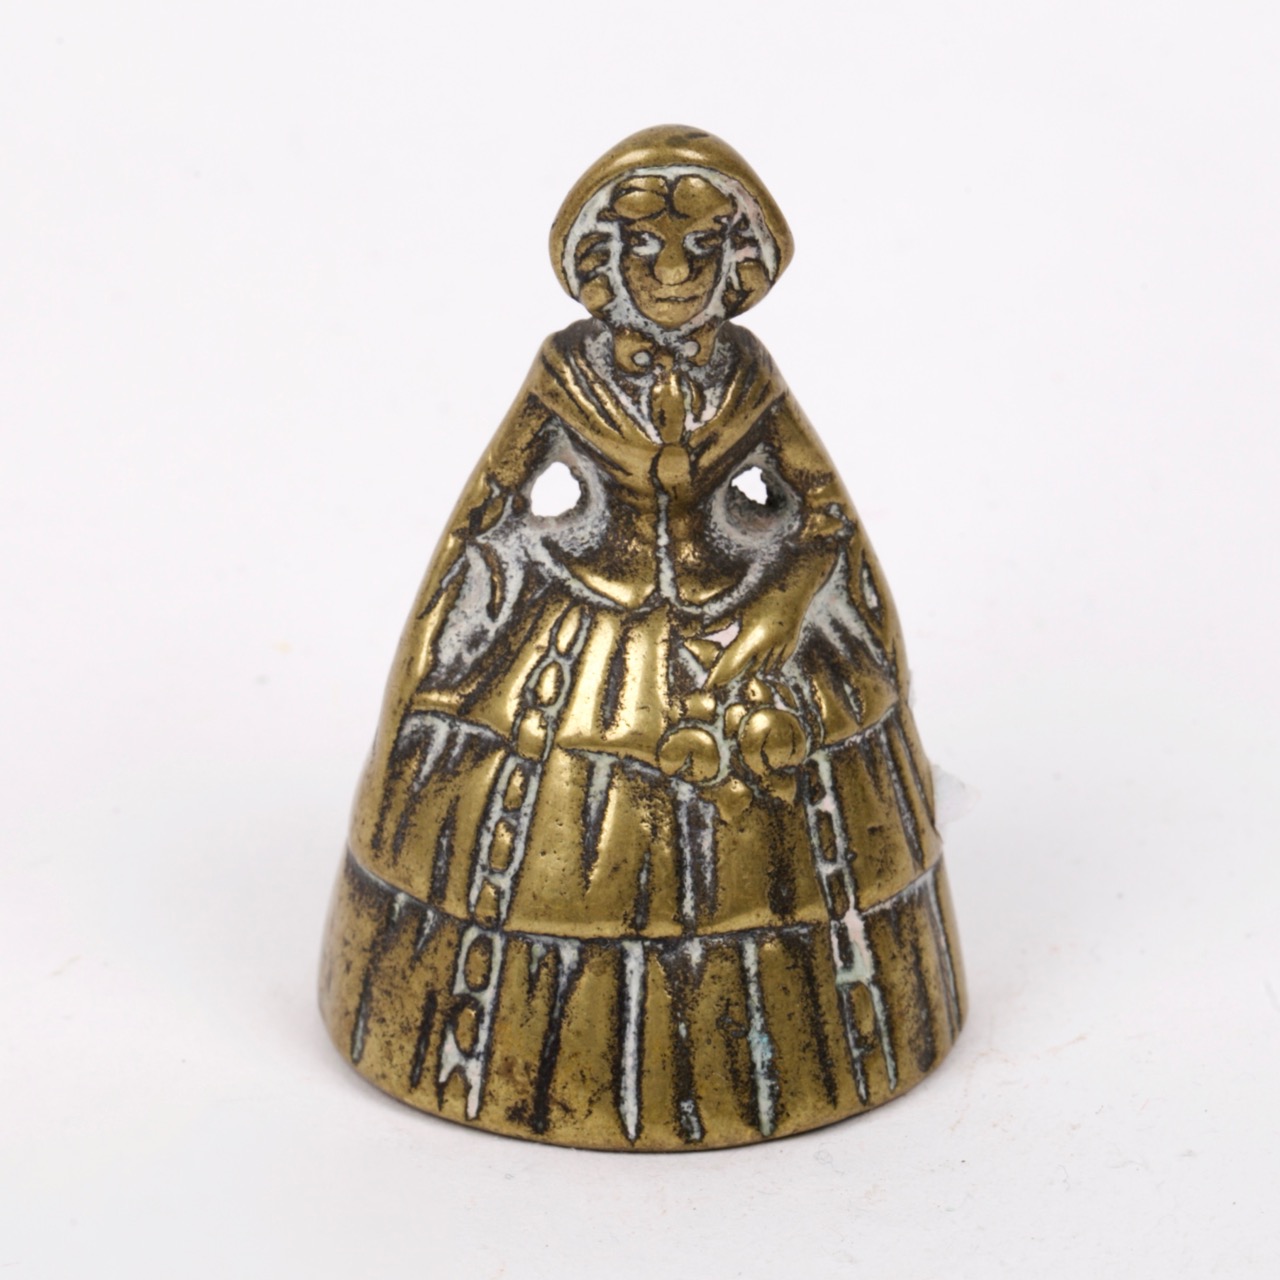 Antique brass bell in a shape of a old woman